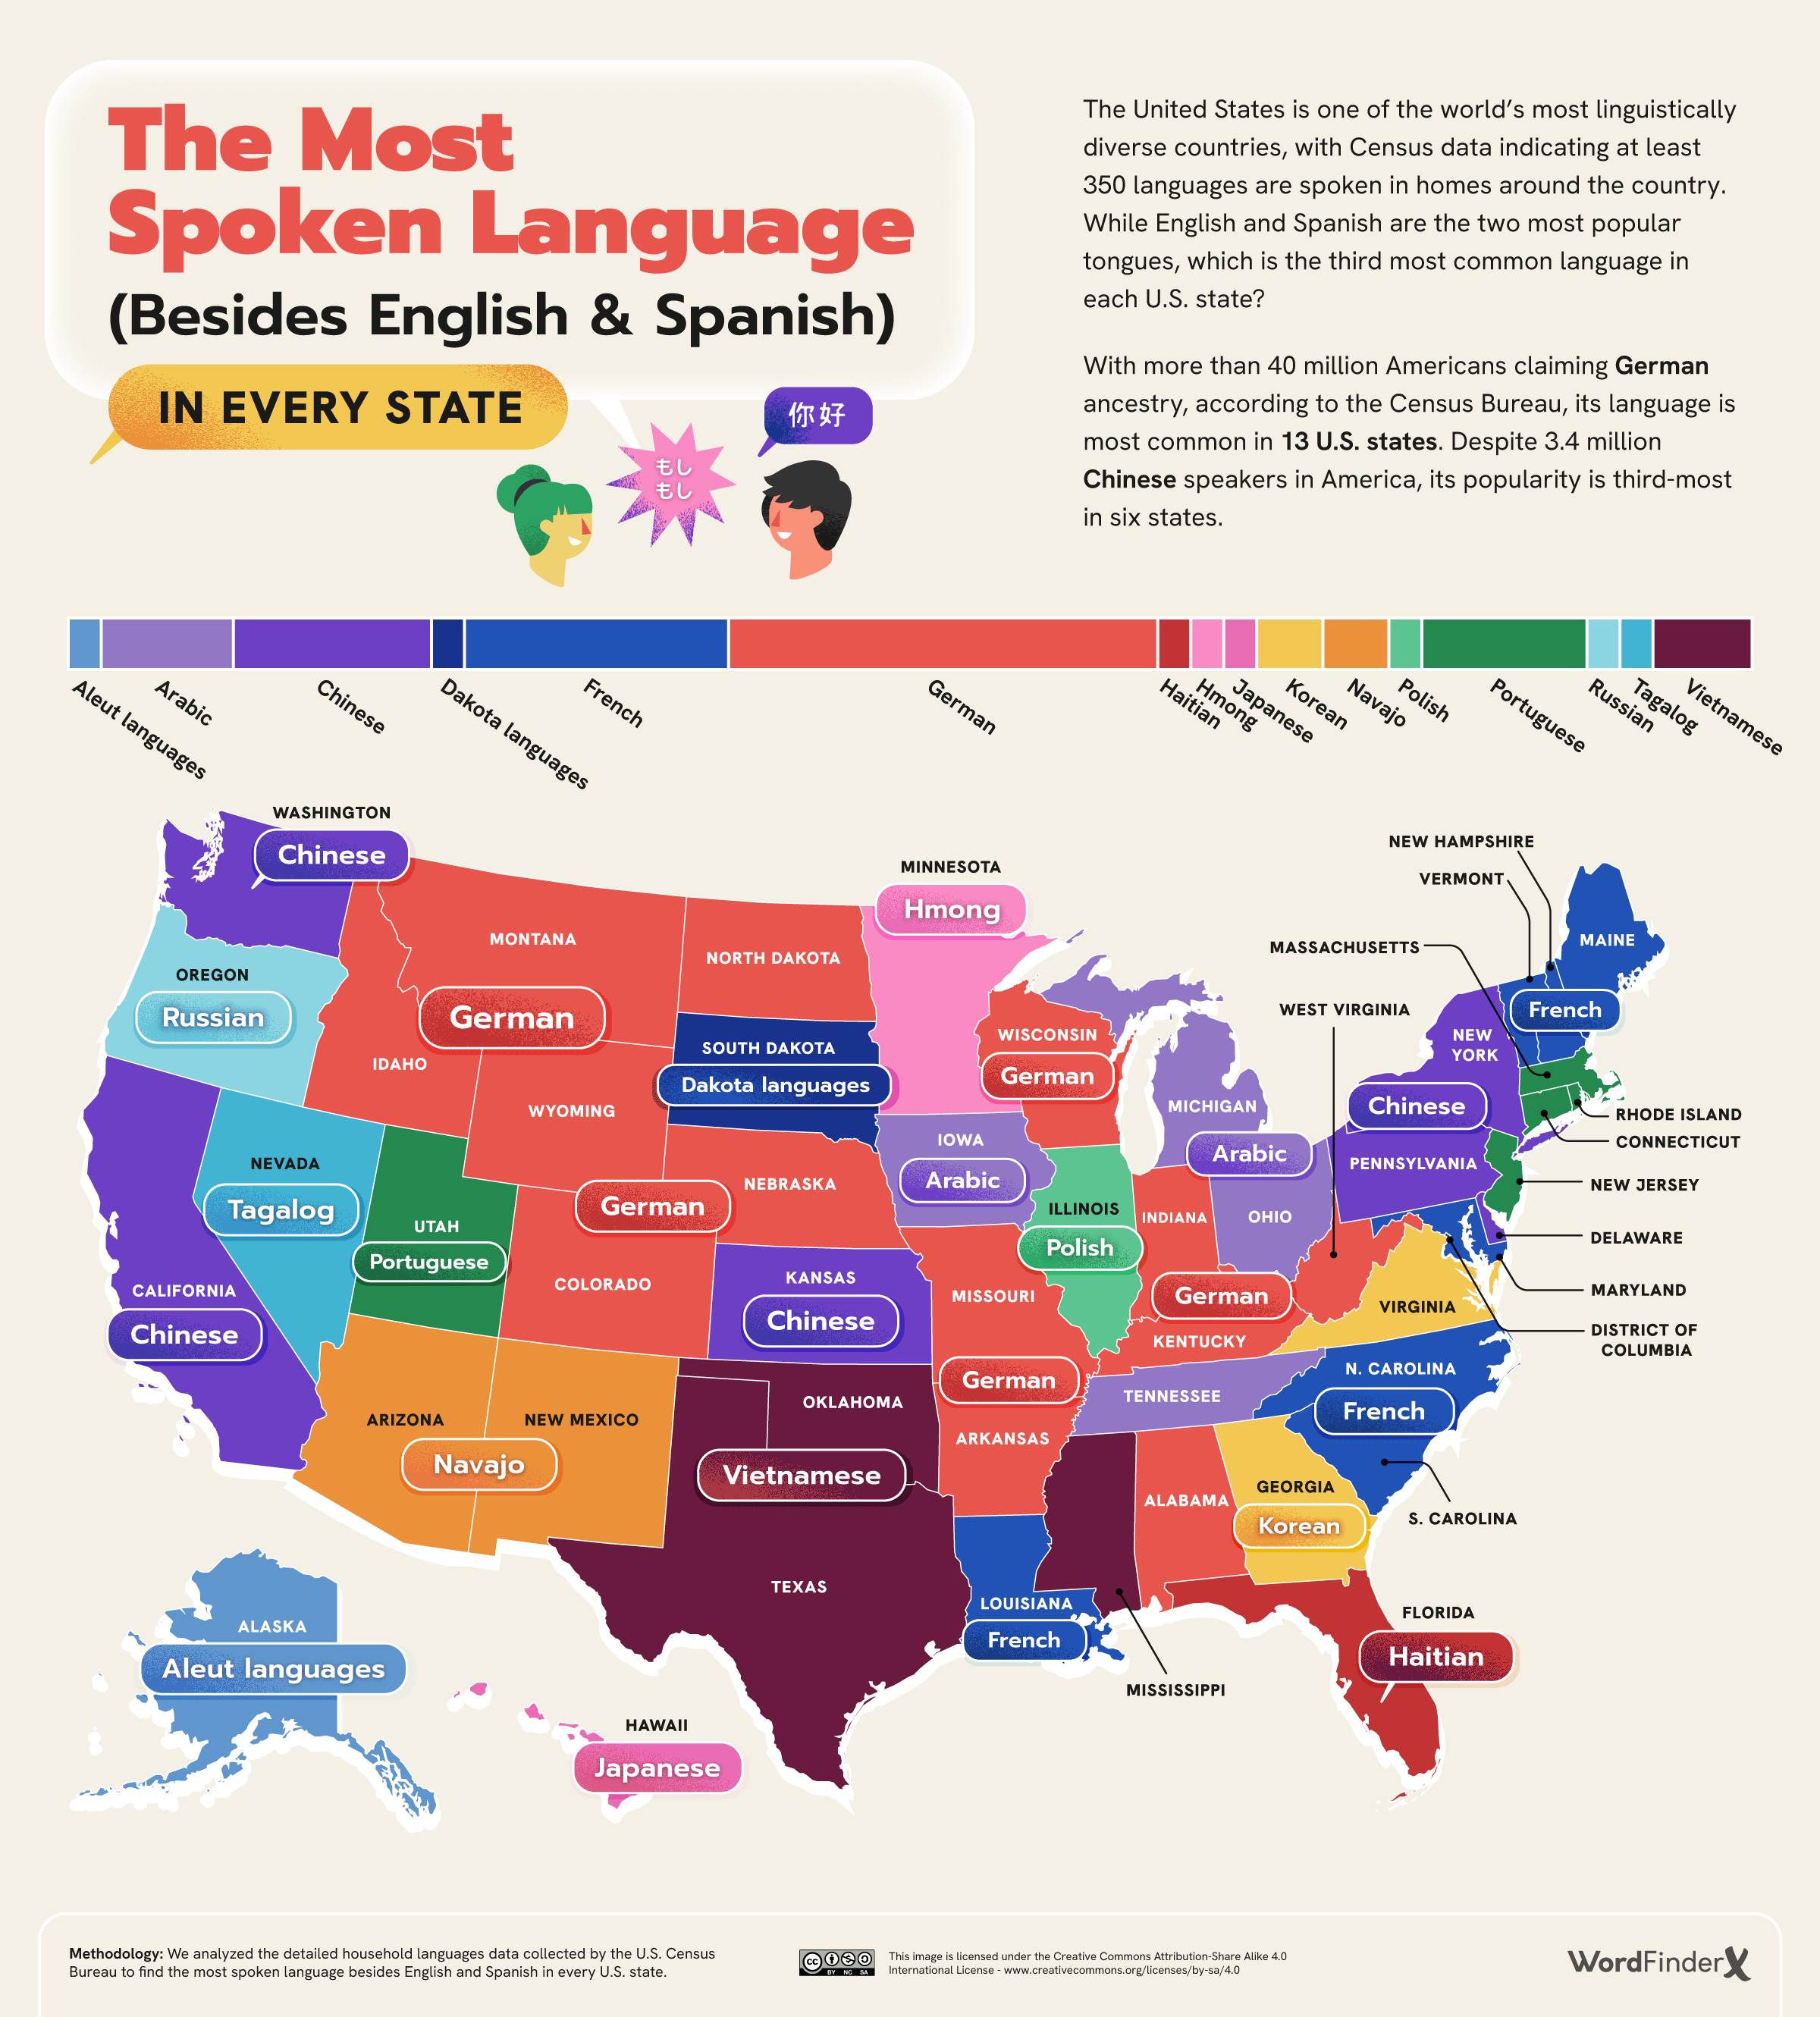 The-Most-Spoken-Language-Besides-English-Spanish-in-Every-U.S.-State